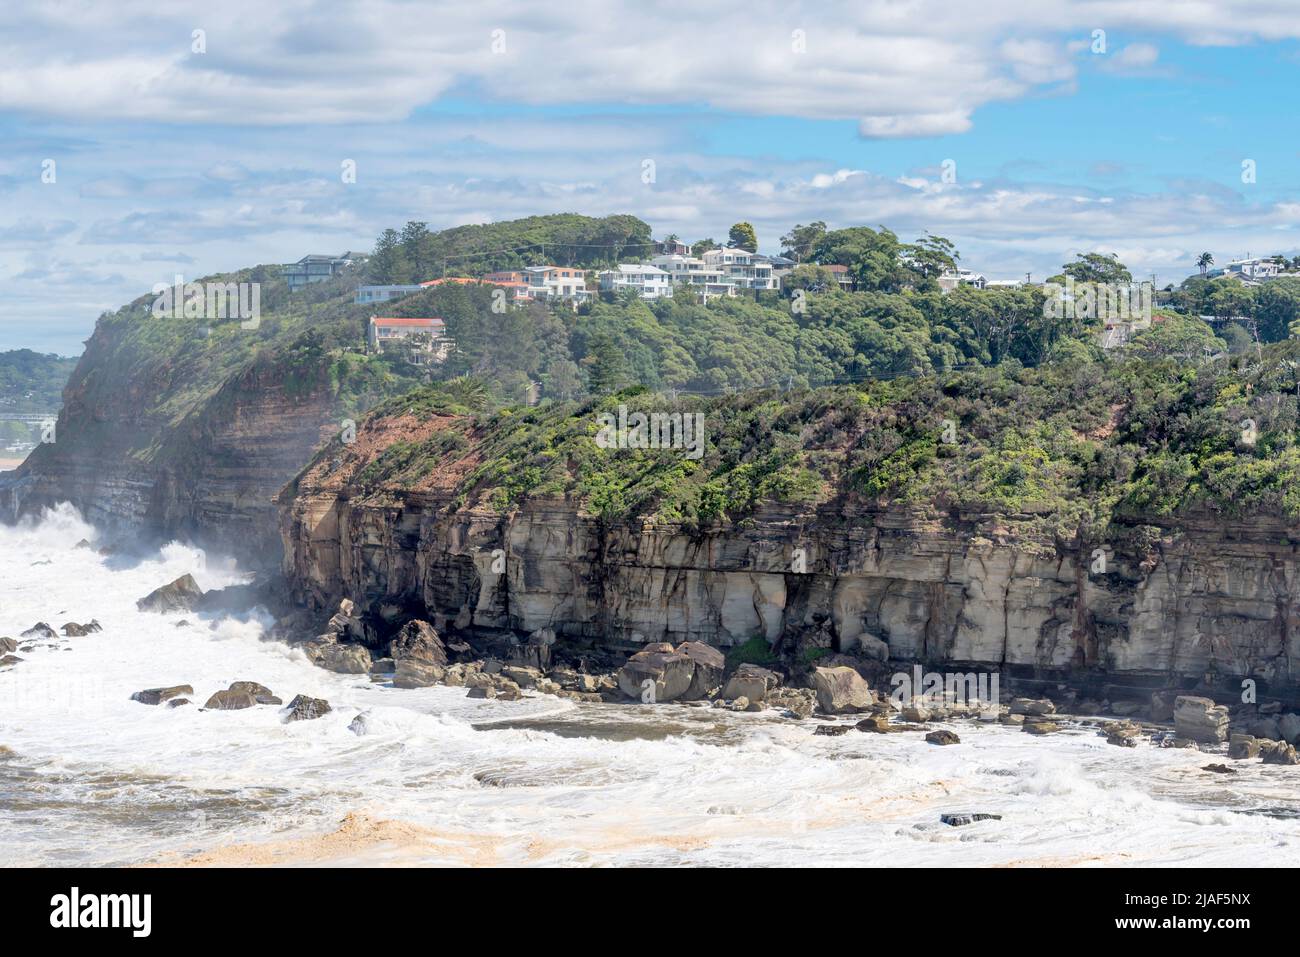 April 4th 2020, Terrigal, NSW, Australia: Seaspray blows up over the headland between Terrigal and North Avoca as wild seas batter the coastline Stock Photo